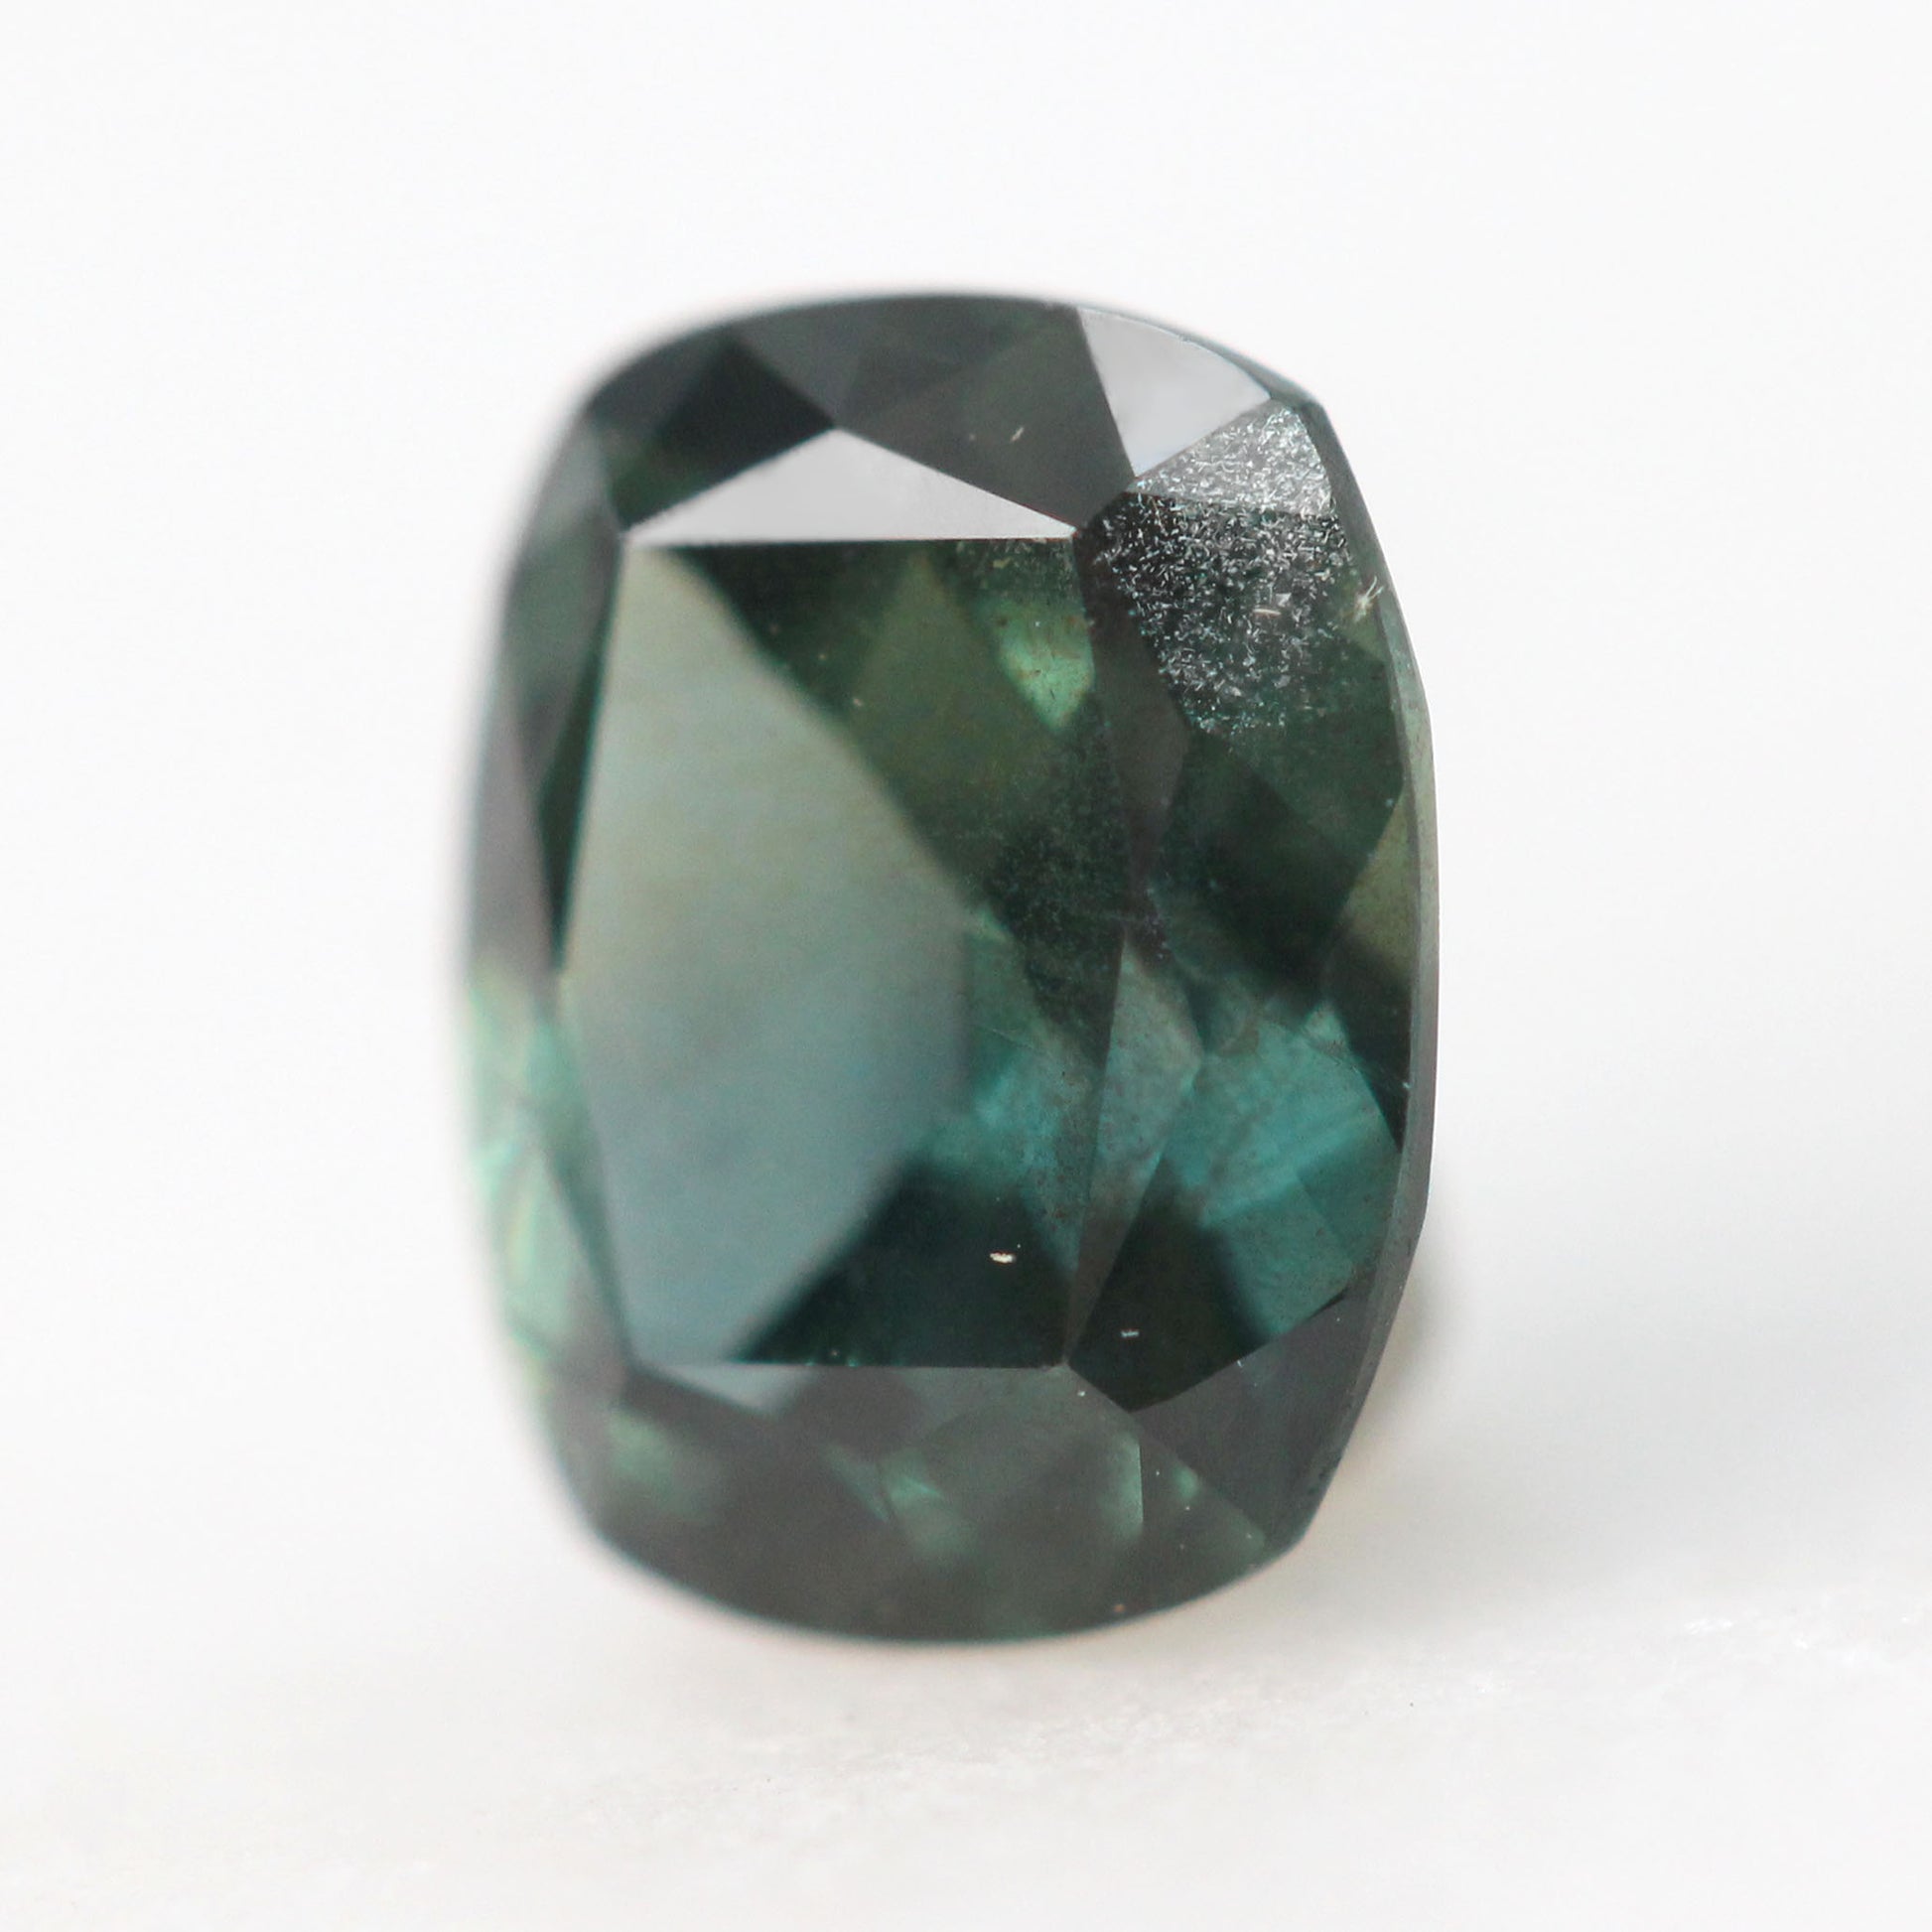 1.12 Carat Teal Green Elongated Cushion Sapphire for Custom Work - Inventory Code TGCS112 - Midwinter Co. Alternative Bridal Rings and Modern Fine Jewelry